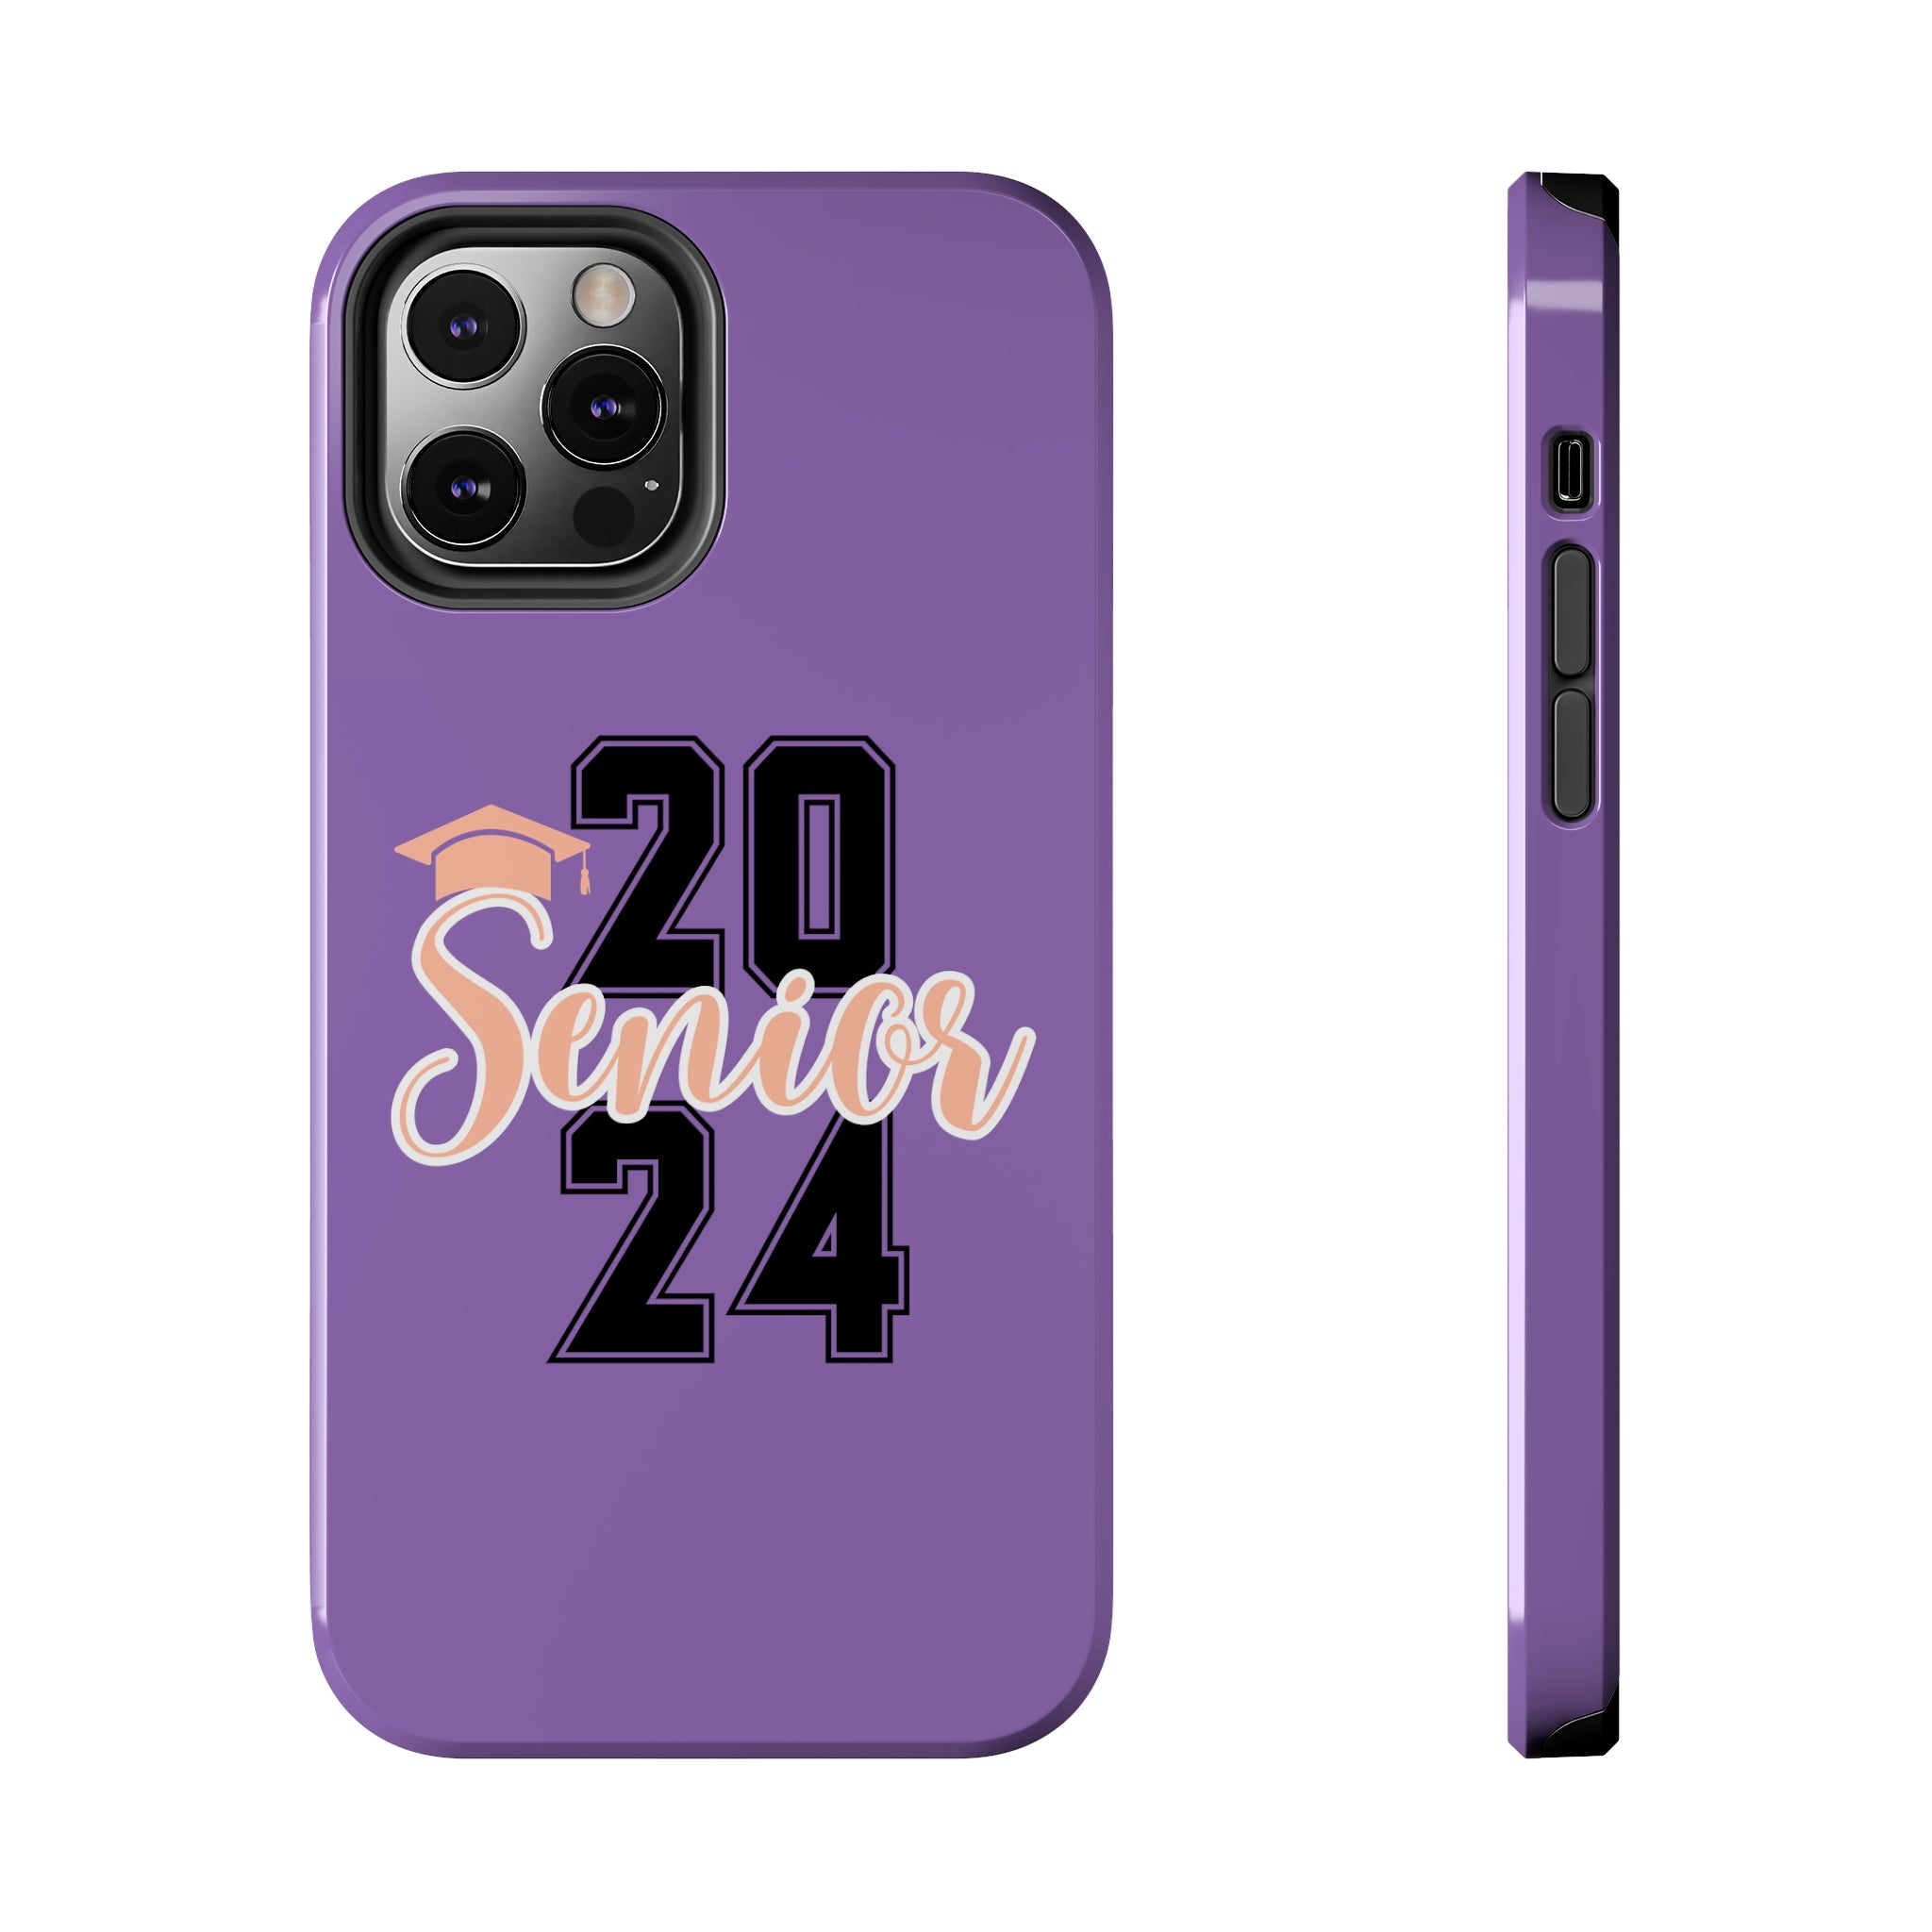 Senior Class Graduate 2024 - Tough Phone Cases - Spruced Roost